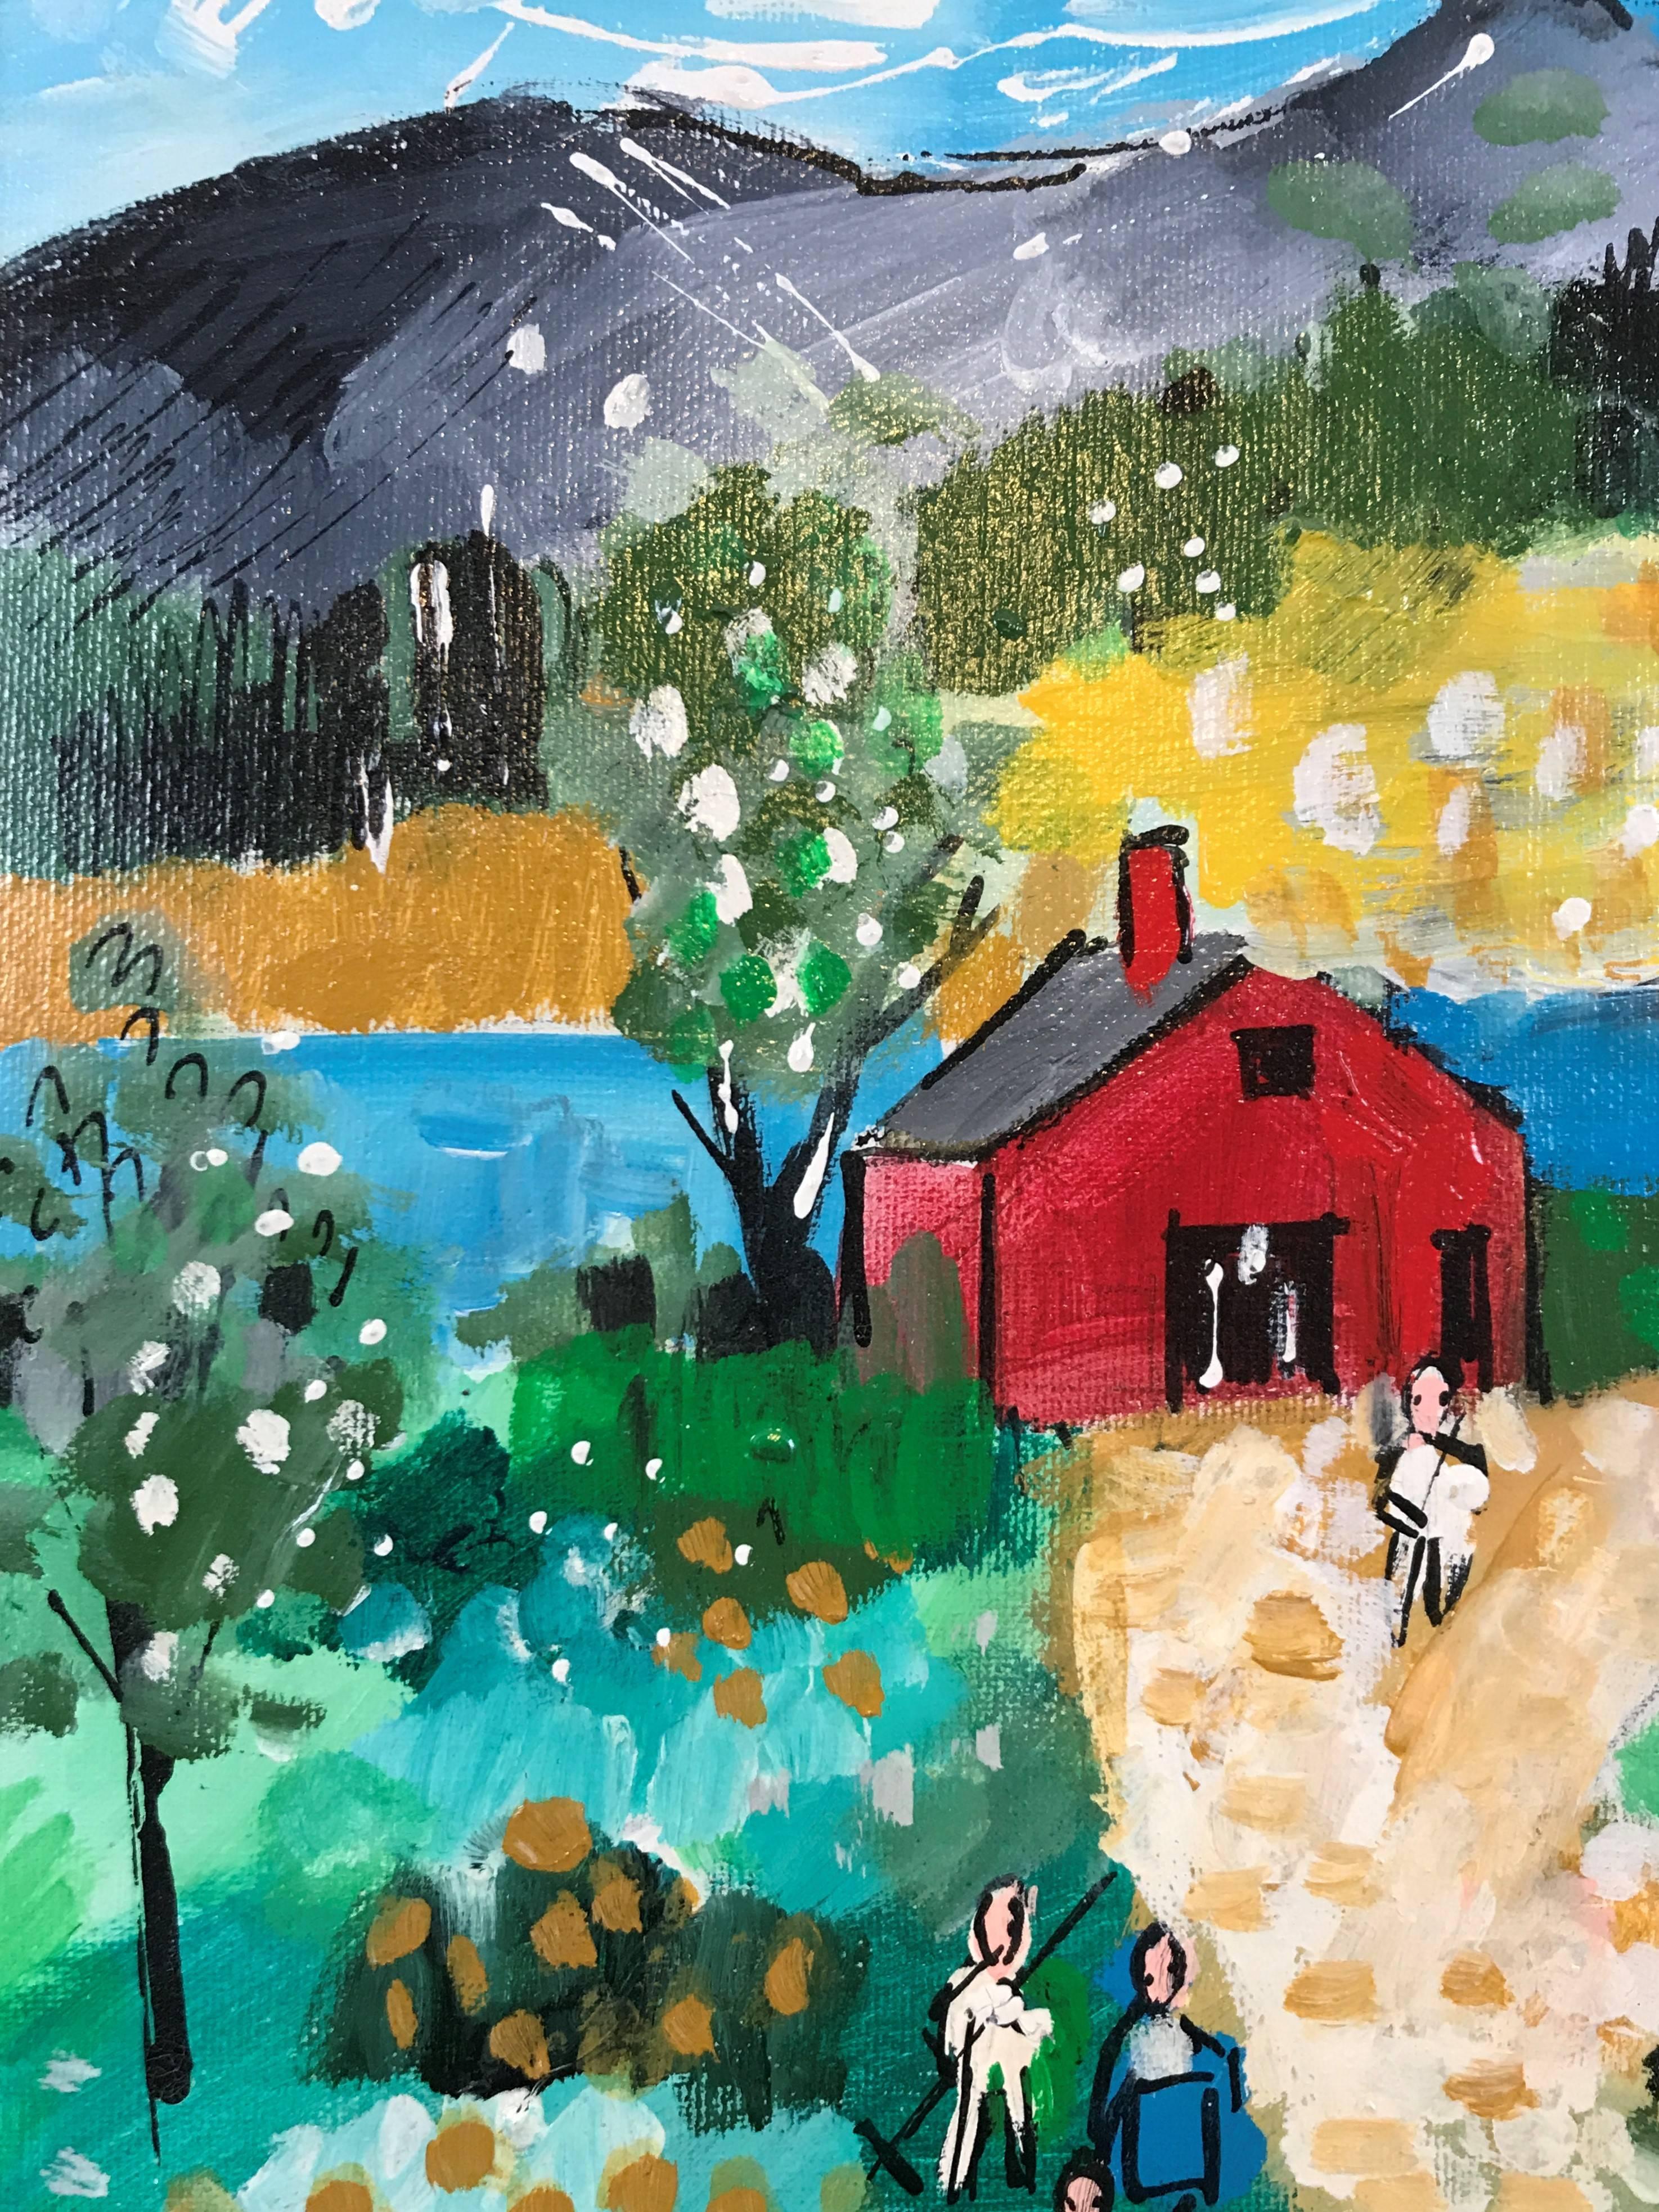 New England Farm - Modern Painting by Charles Cobelle